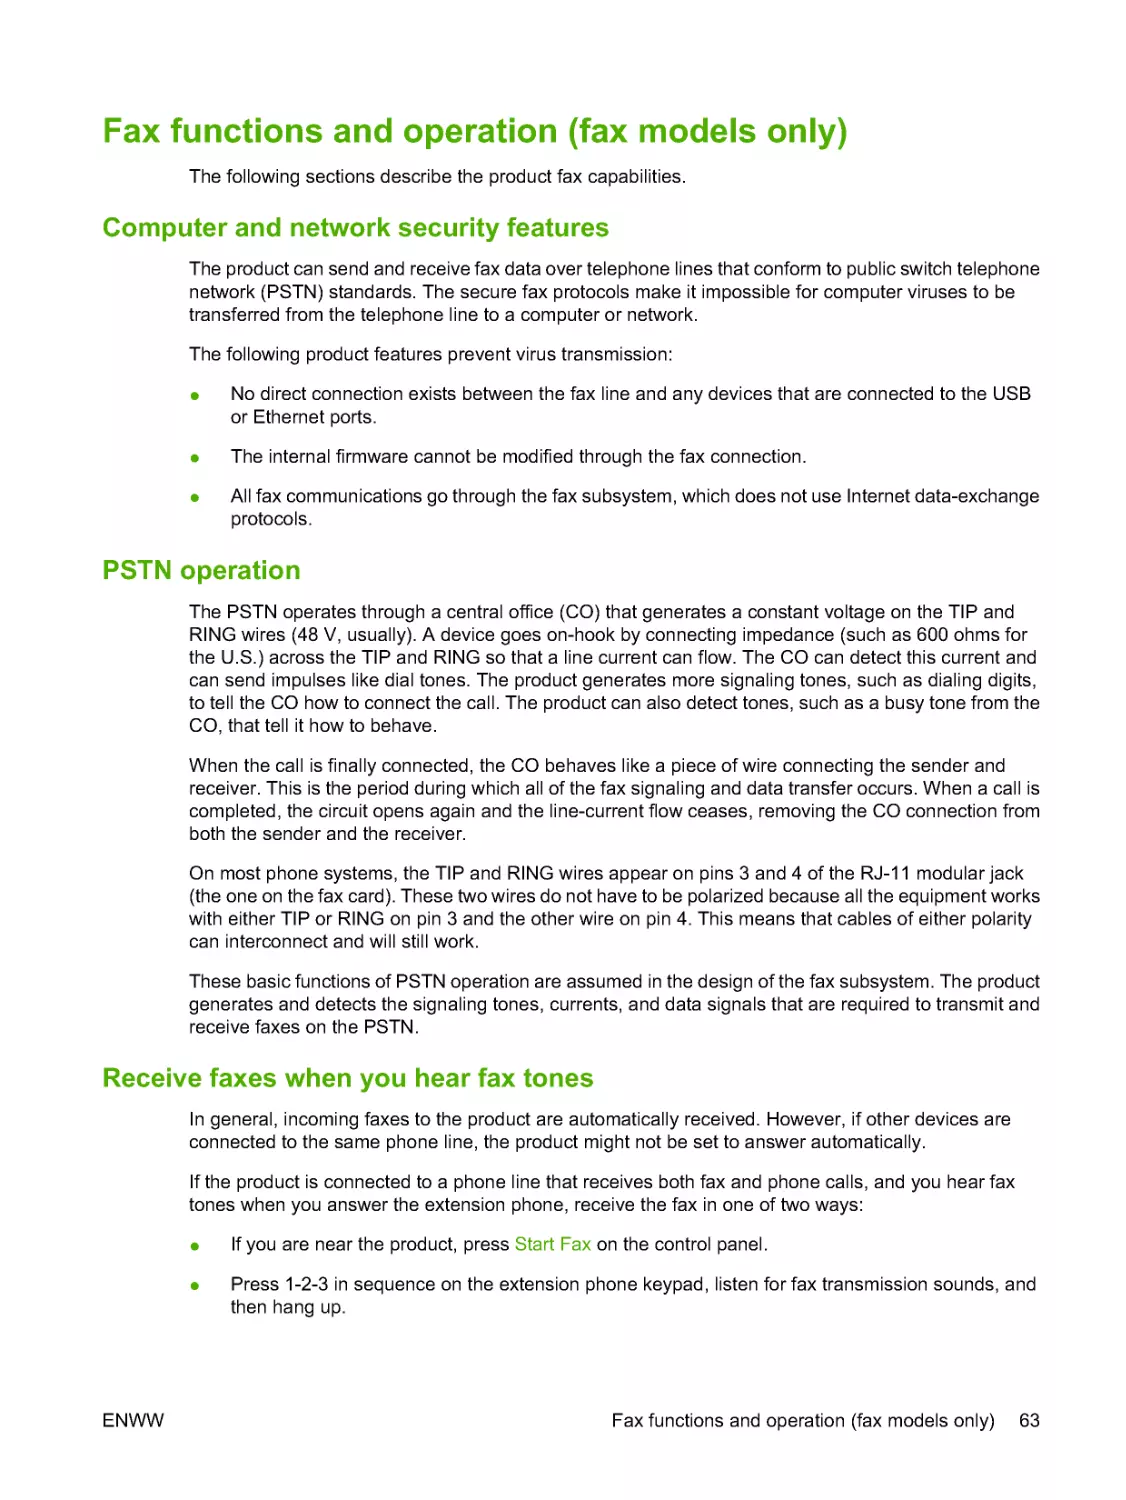 Computer and network security features
PSTN operation
Receive faxes when you hear fax tones